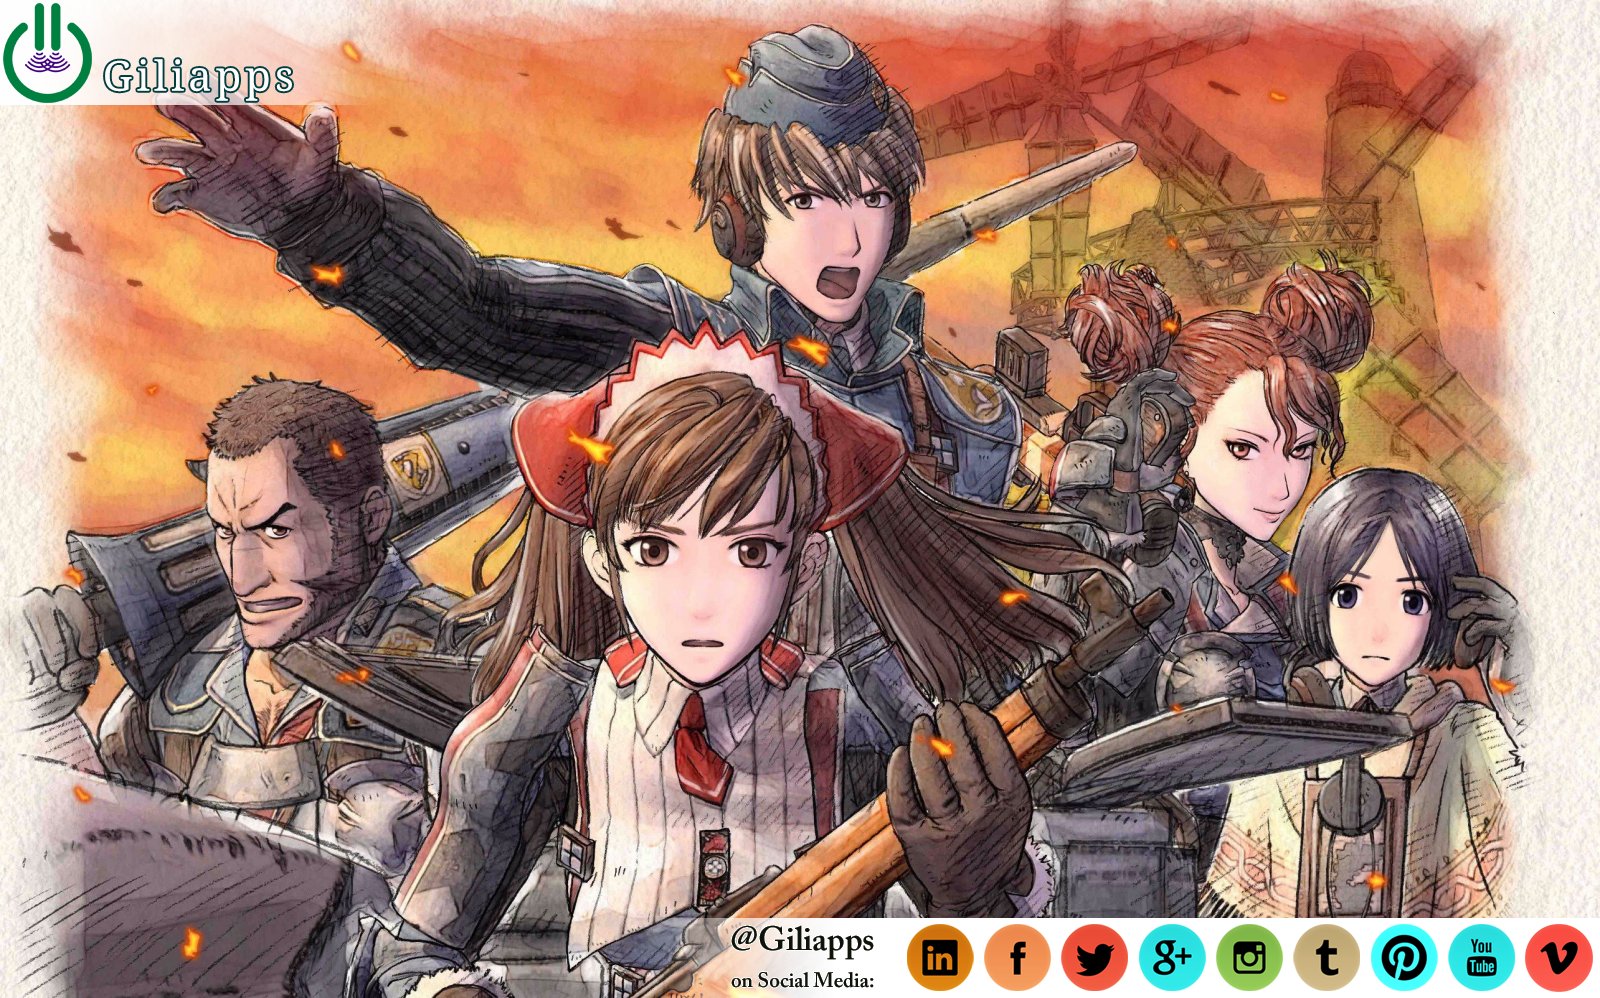 Valkyria Chronicles 4 will release on 21 Mar 2018